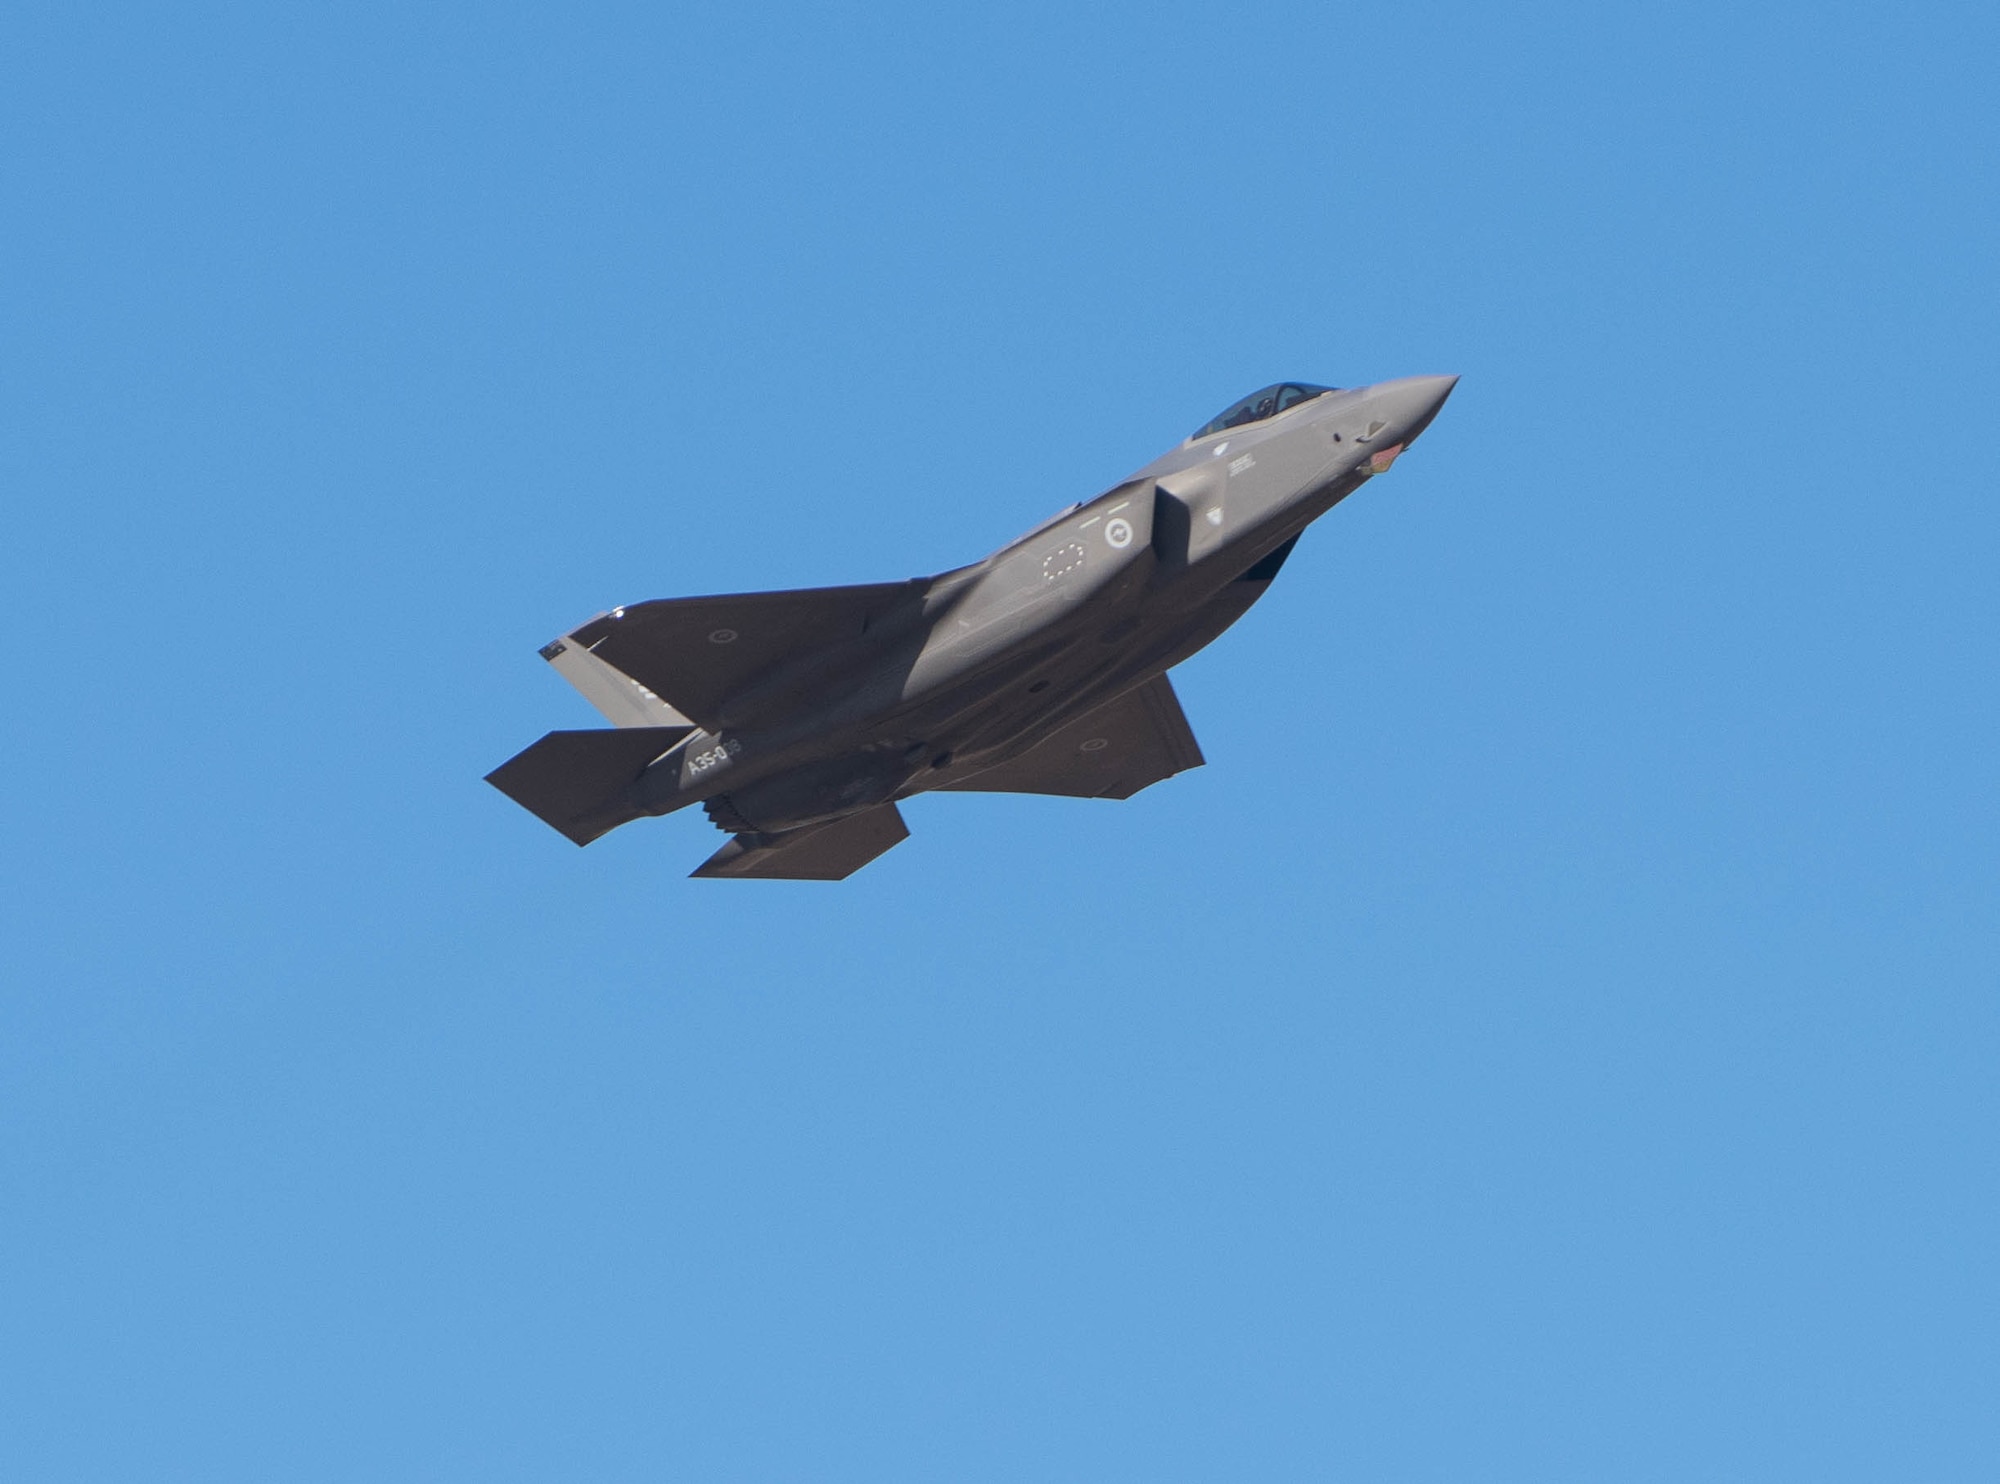 An F-35A Lightning II, assigned to the 61st Fighter Squadron, takes off during a sortie Oct. 28, 2019, at Luke Air Force Base, Ariz.